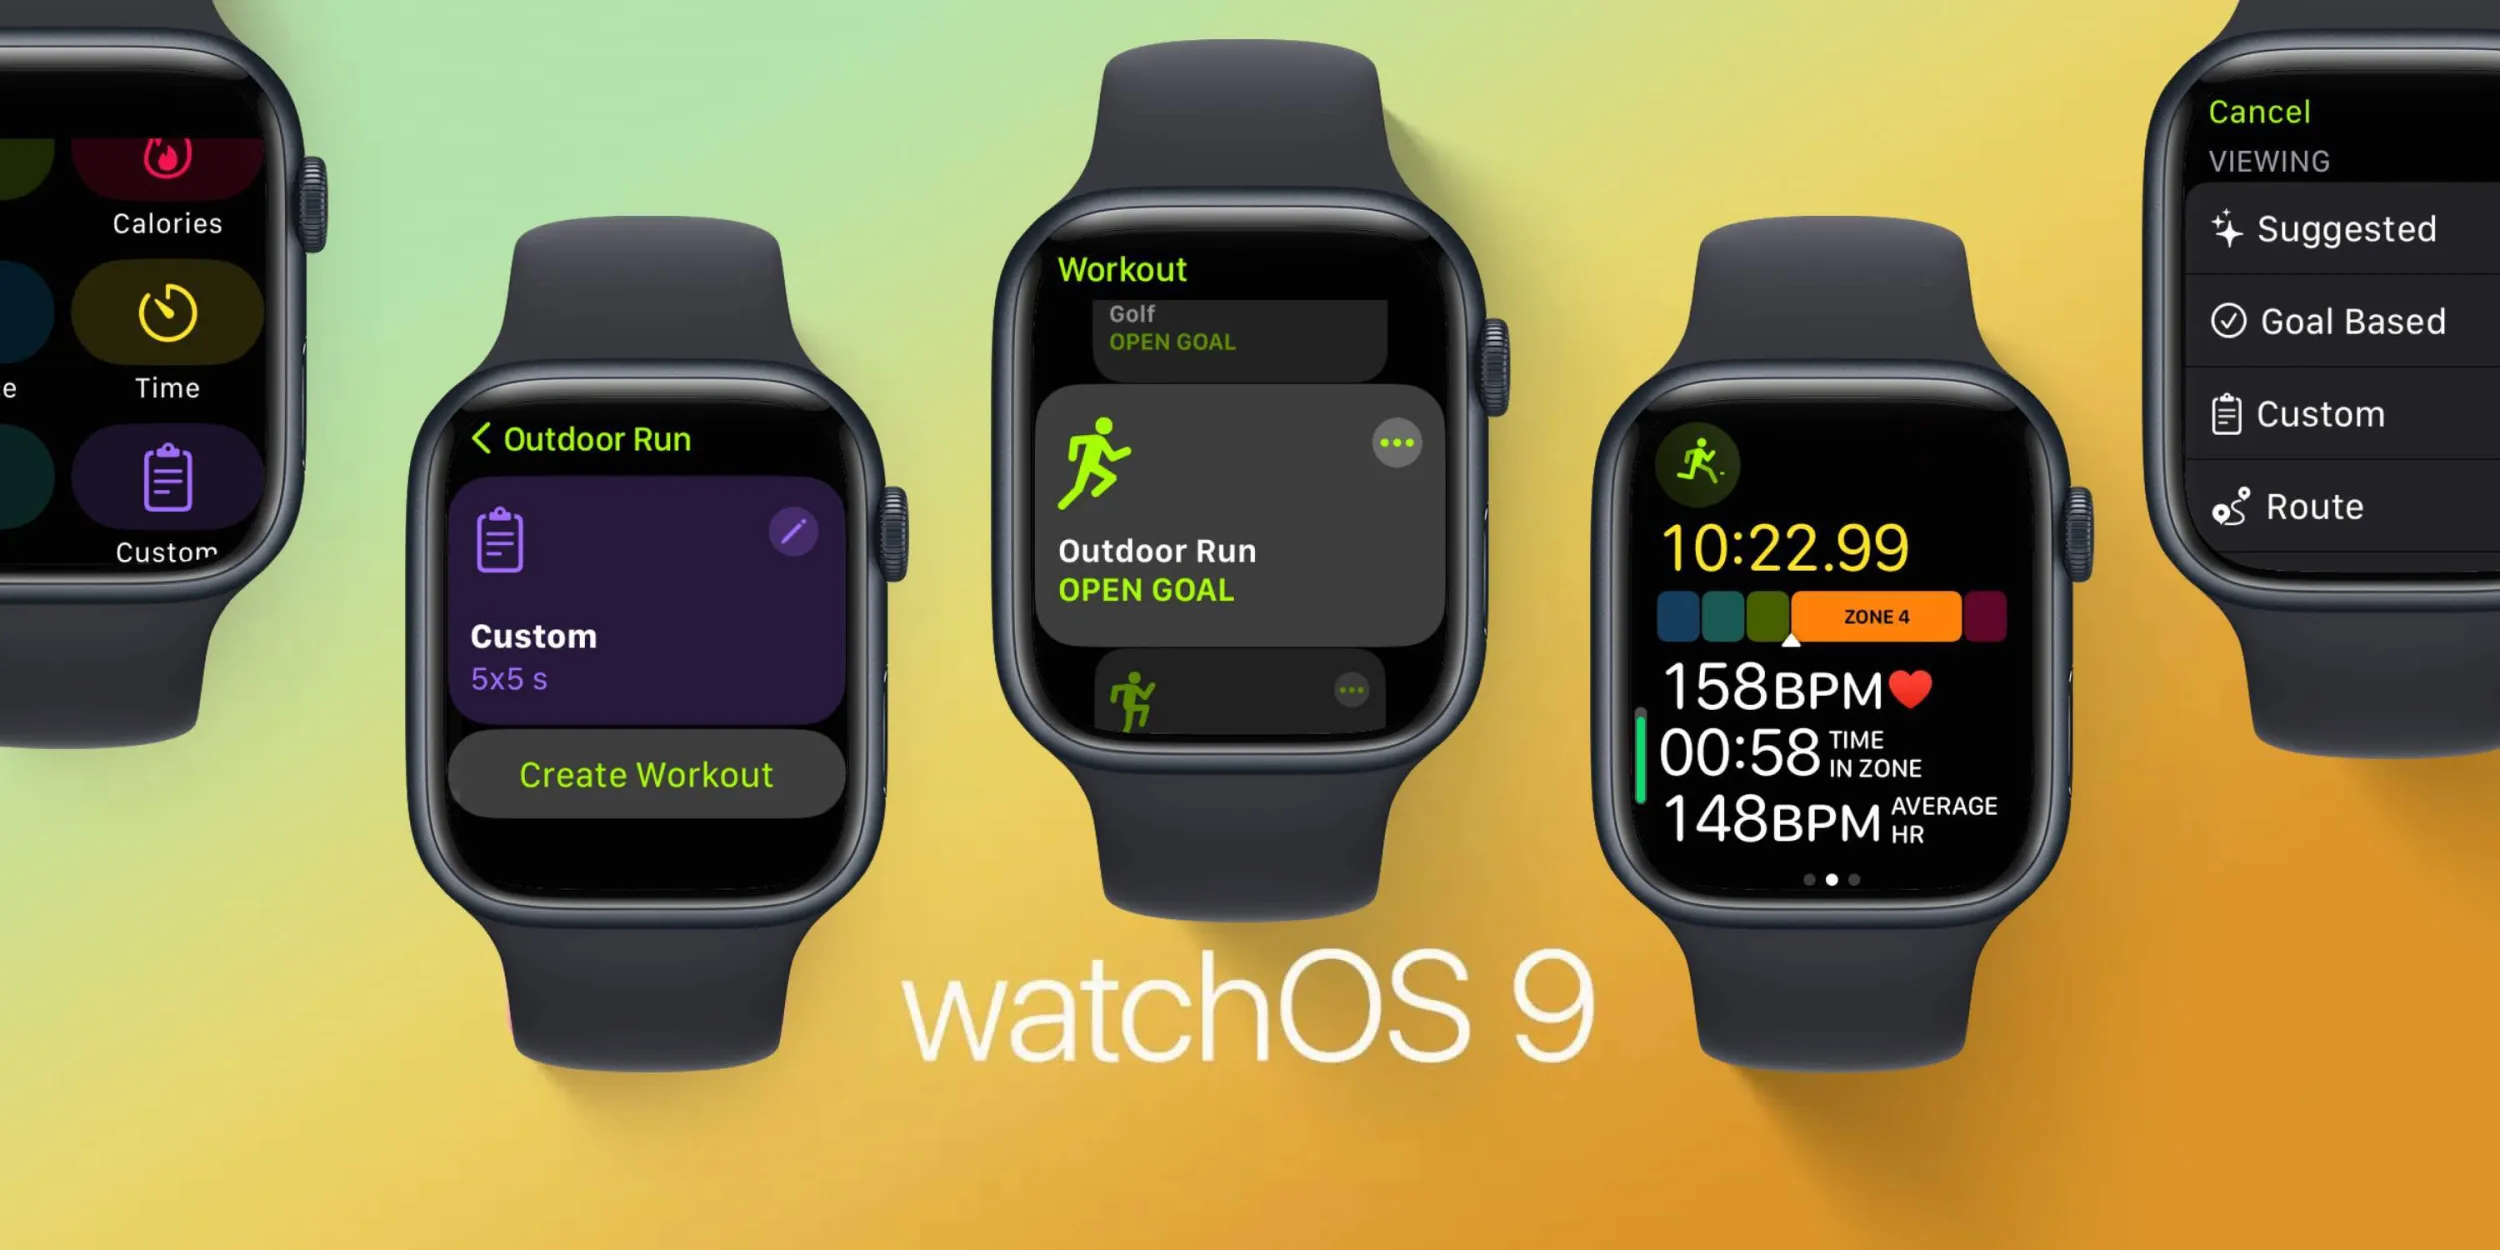 Apple Watch running metrics: How to use the new Workout features in watchOS 9